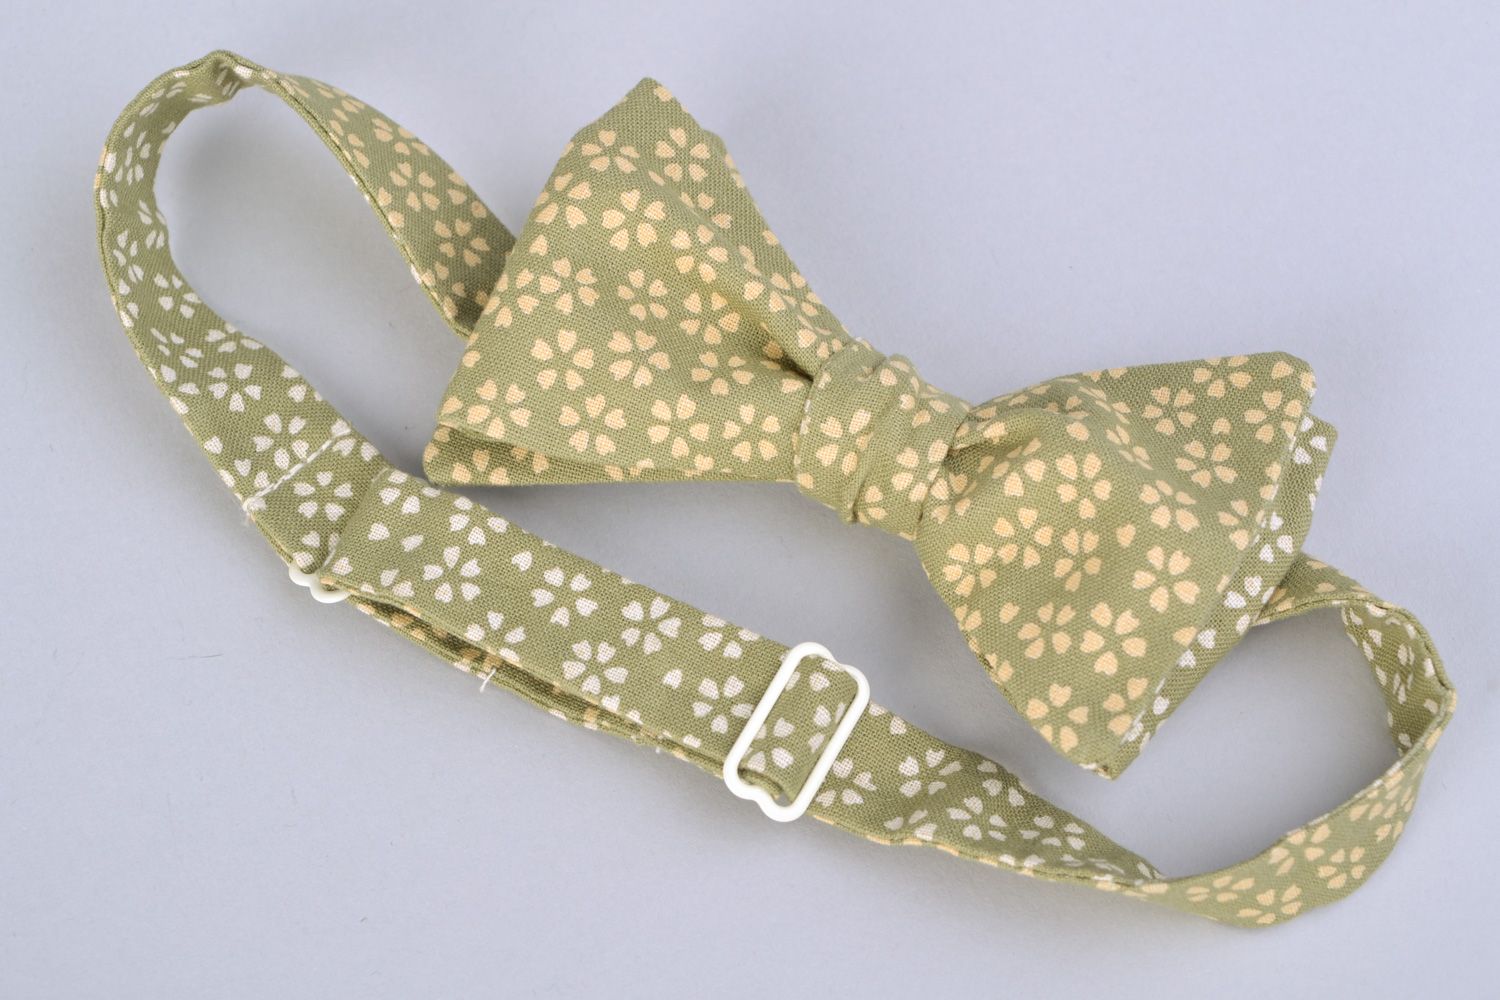 Handmade bow tie sewn of cotton fabric with floral pattern in calm color palette photo 4